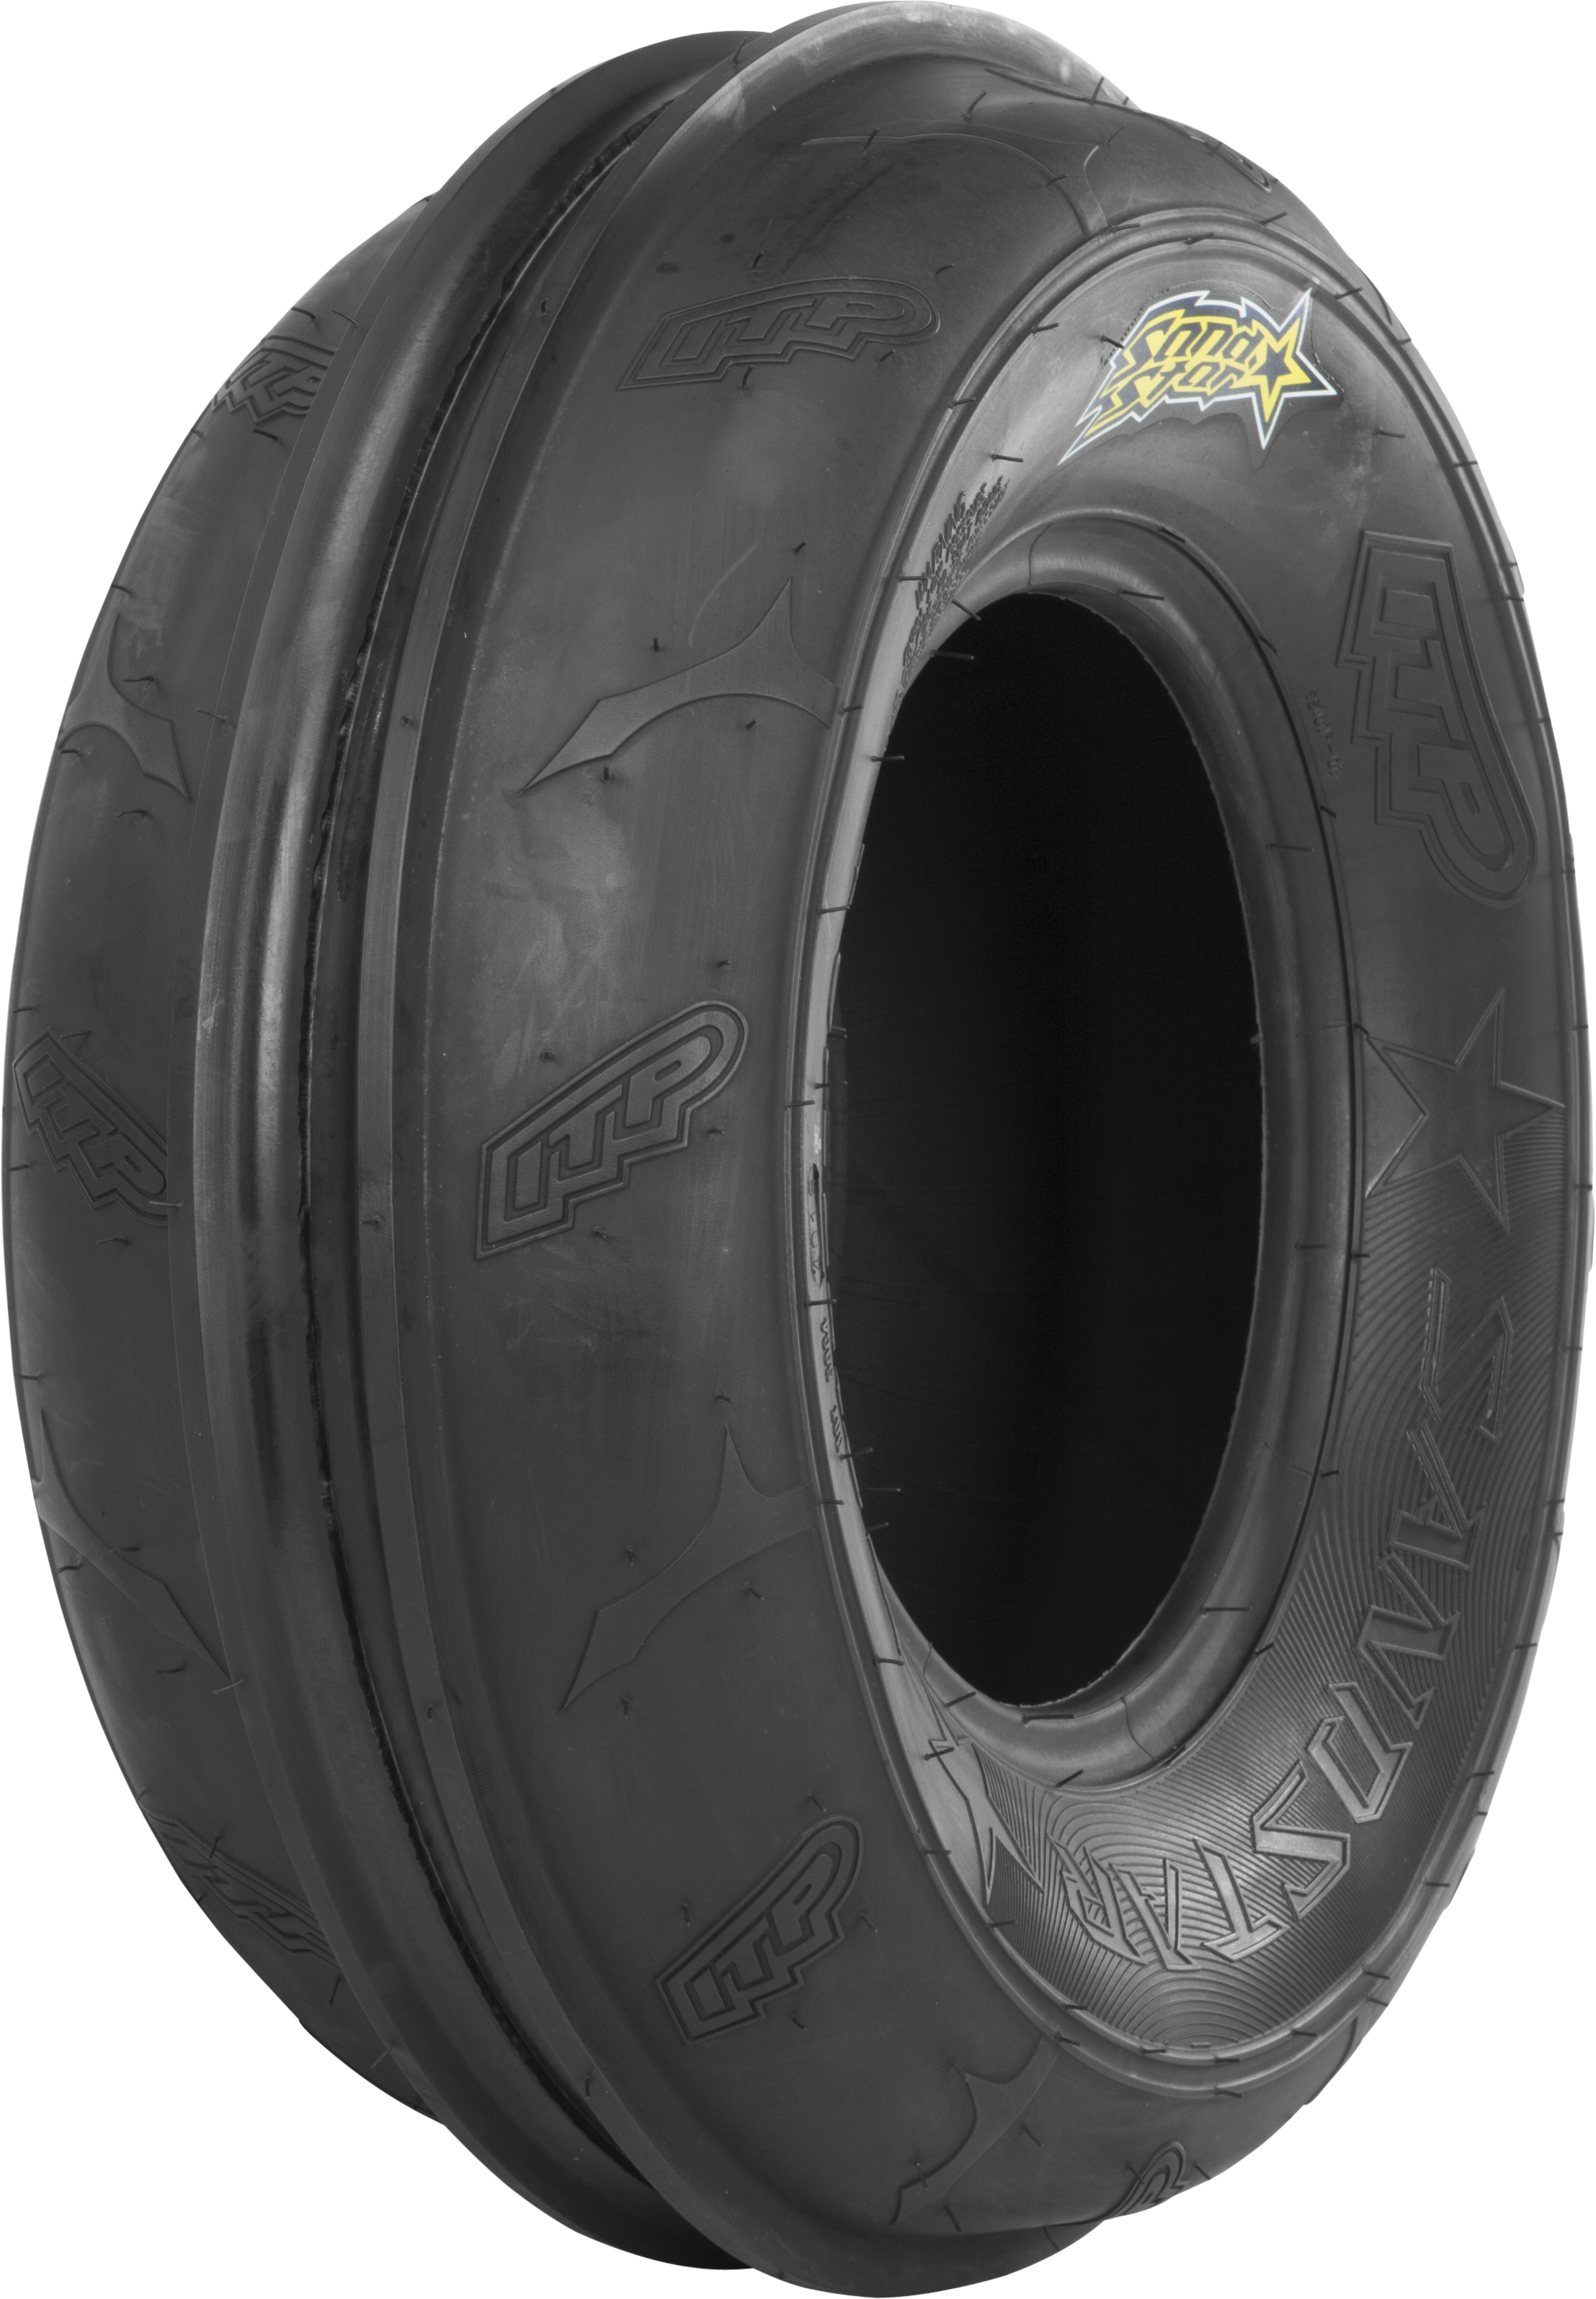 SAND STAR TIRE 19X6-10 FRONT - Click Image to Close